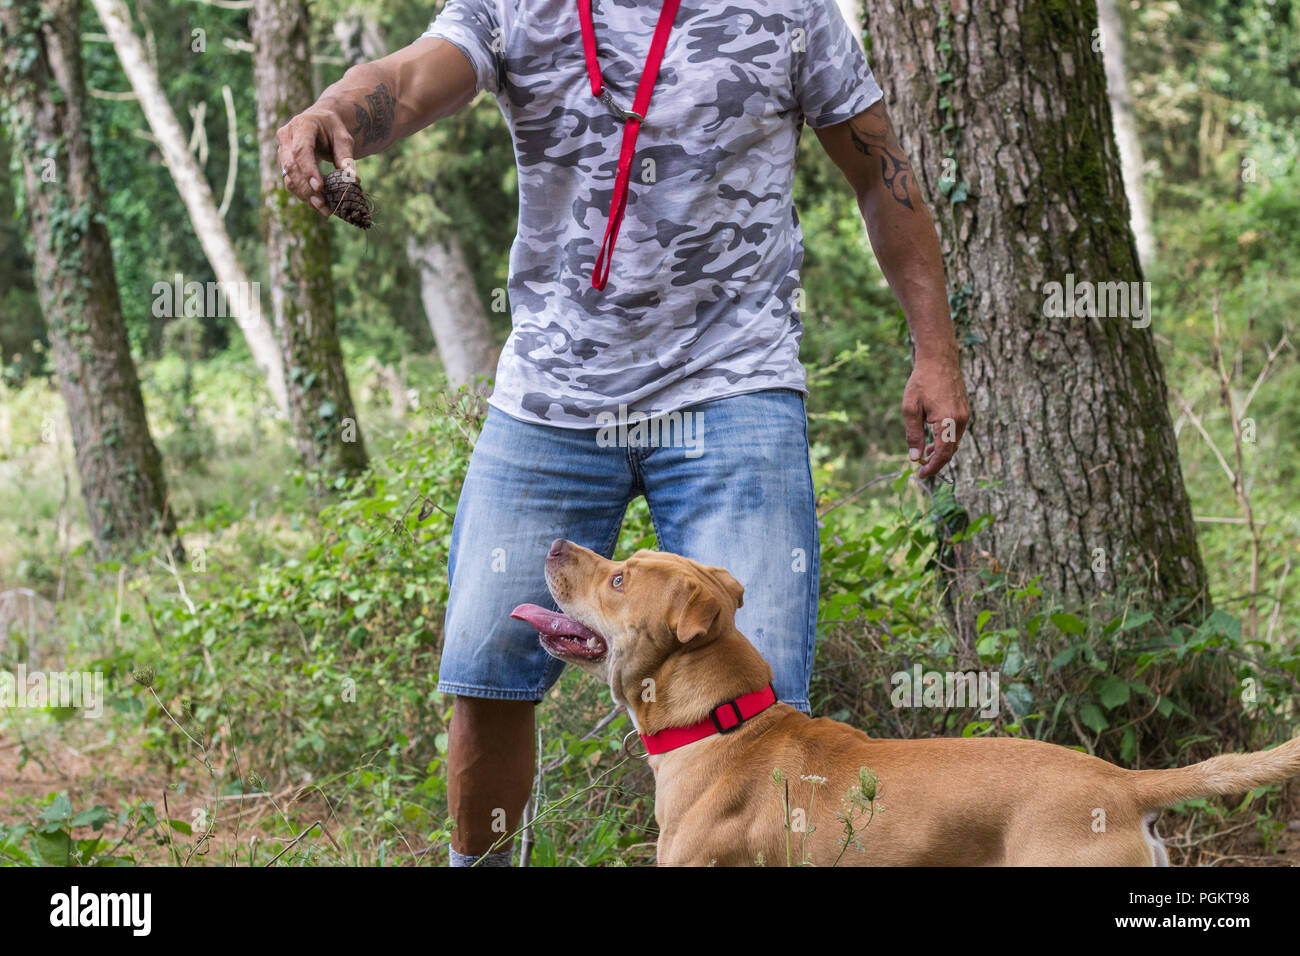 Man training dog pit bull forest outdoors pet Stock Photo